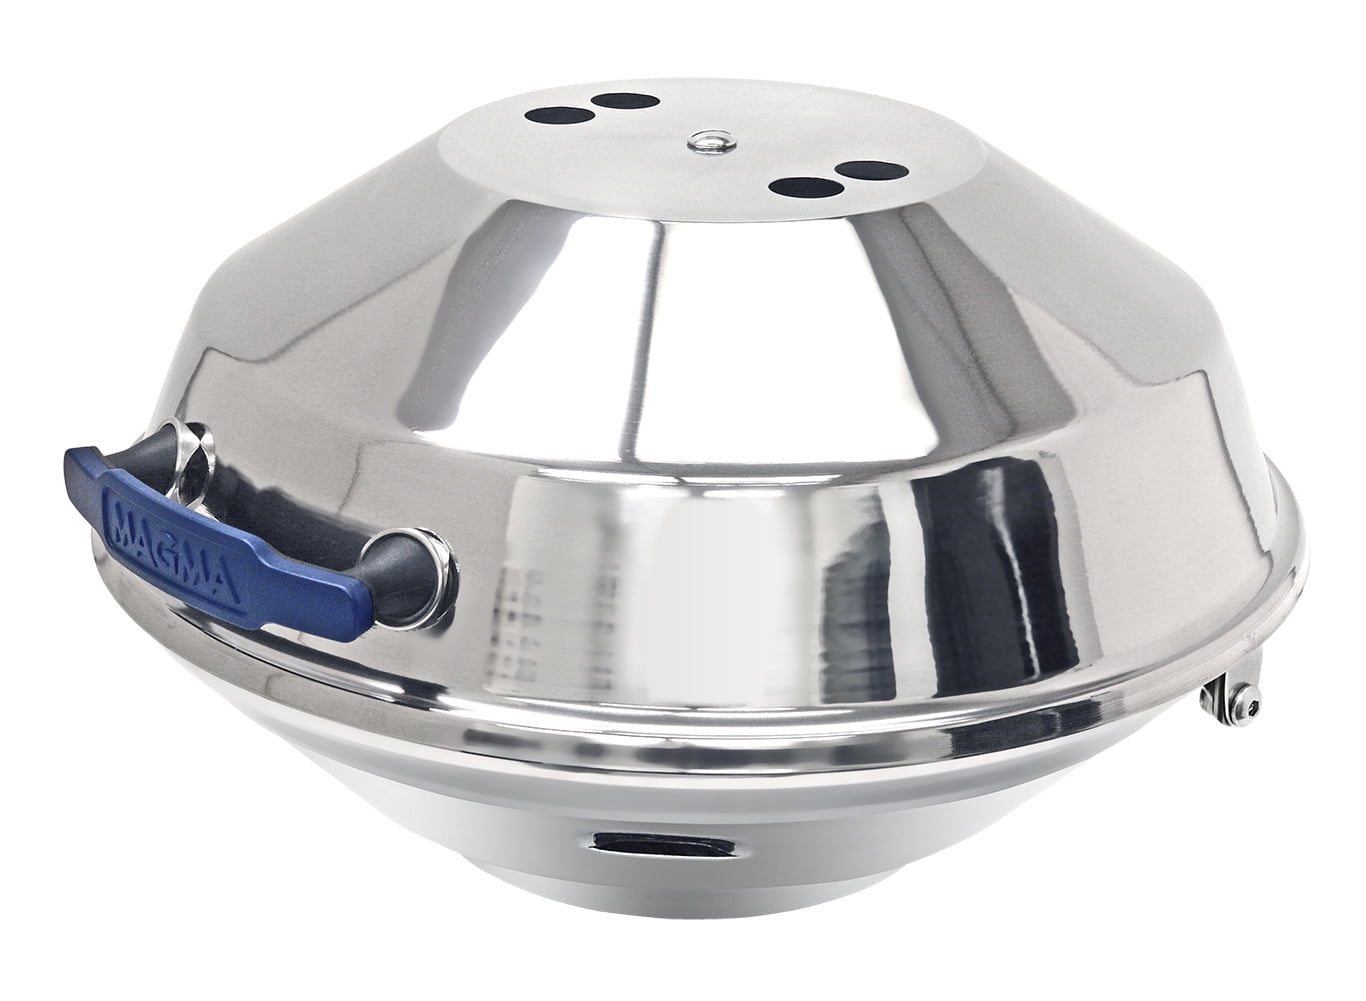 Magma Marine Kettle 2 Gas Grill Stainless steel for sale online A10-207 